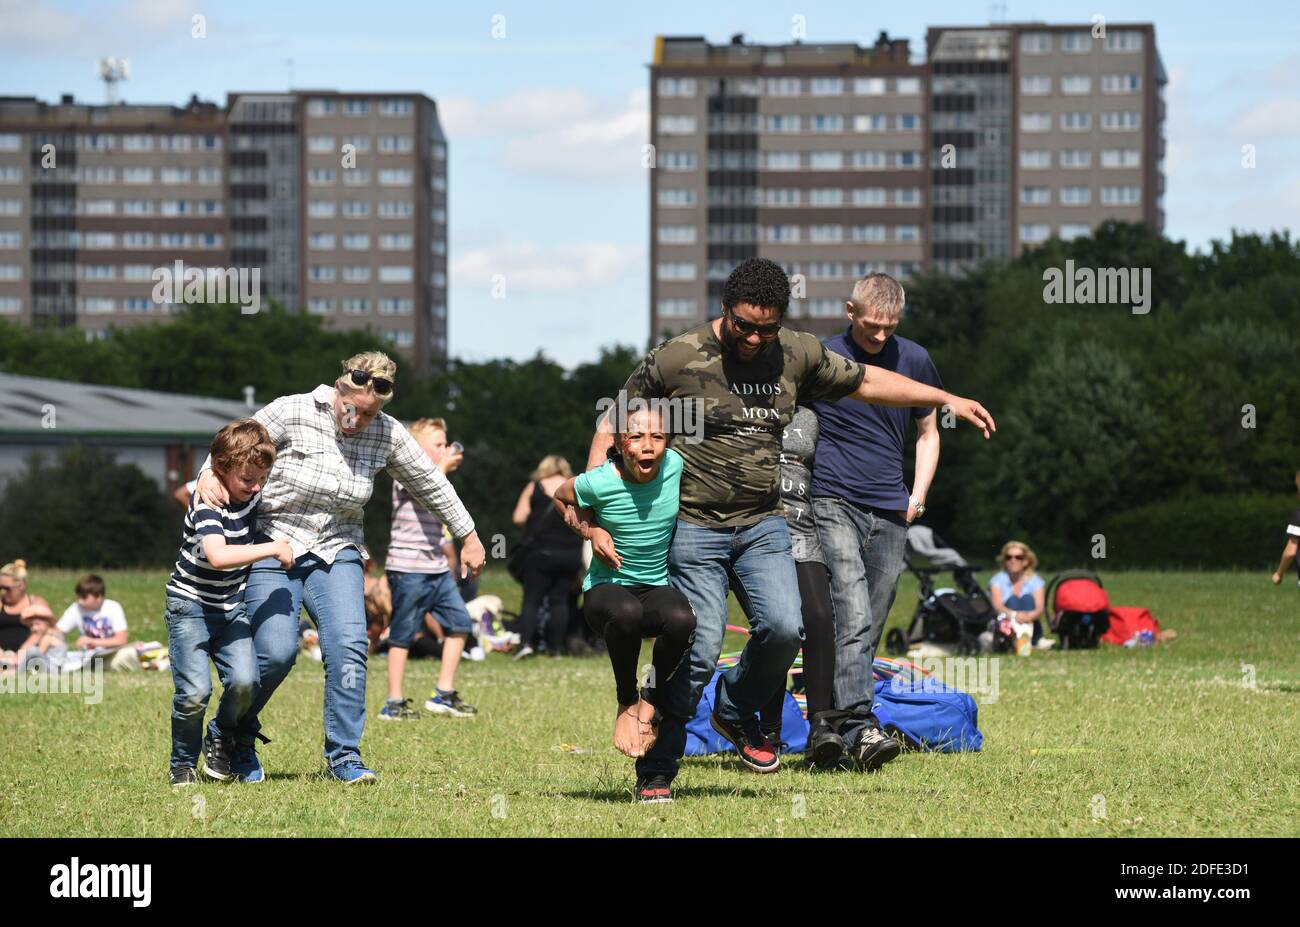 Children and families playing having fun in the park at Nechalls Birmingham Stock Photo